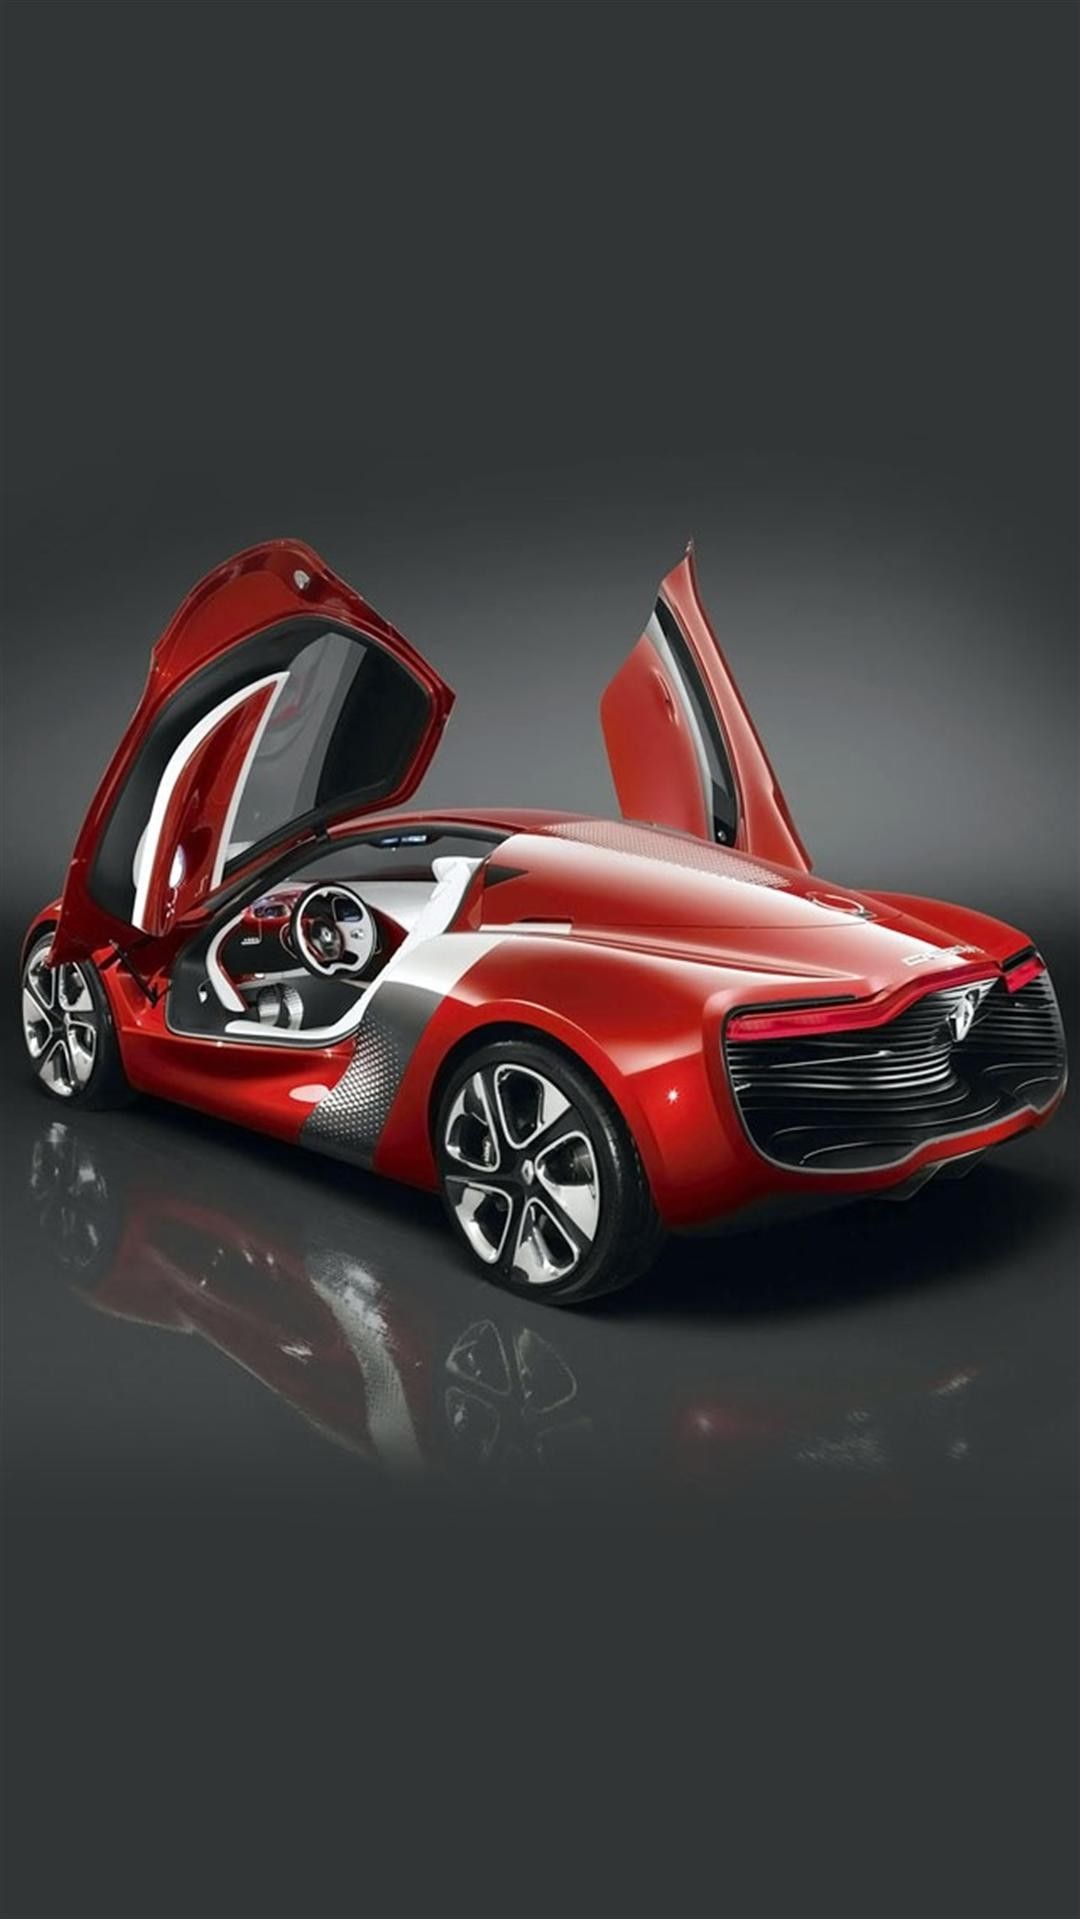 Renault DeZir Concept Car Android Wallpaper free download